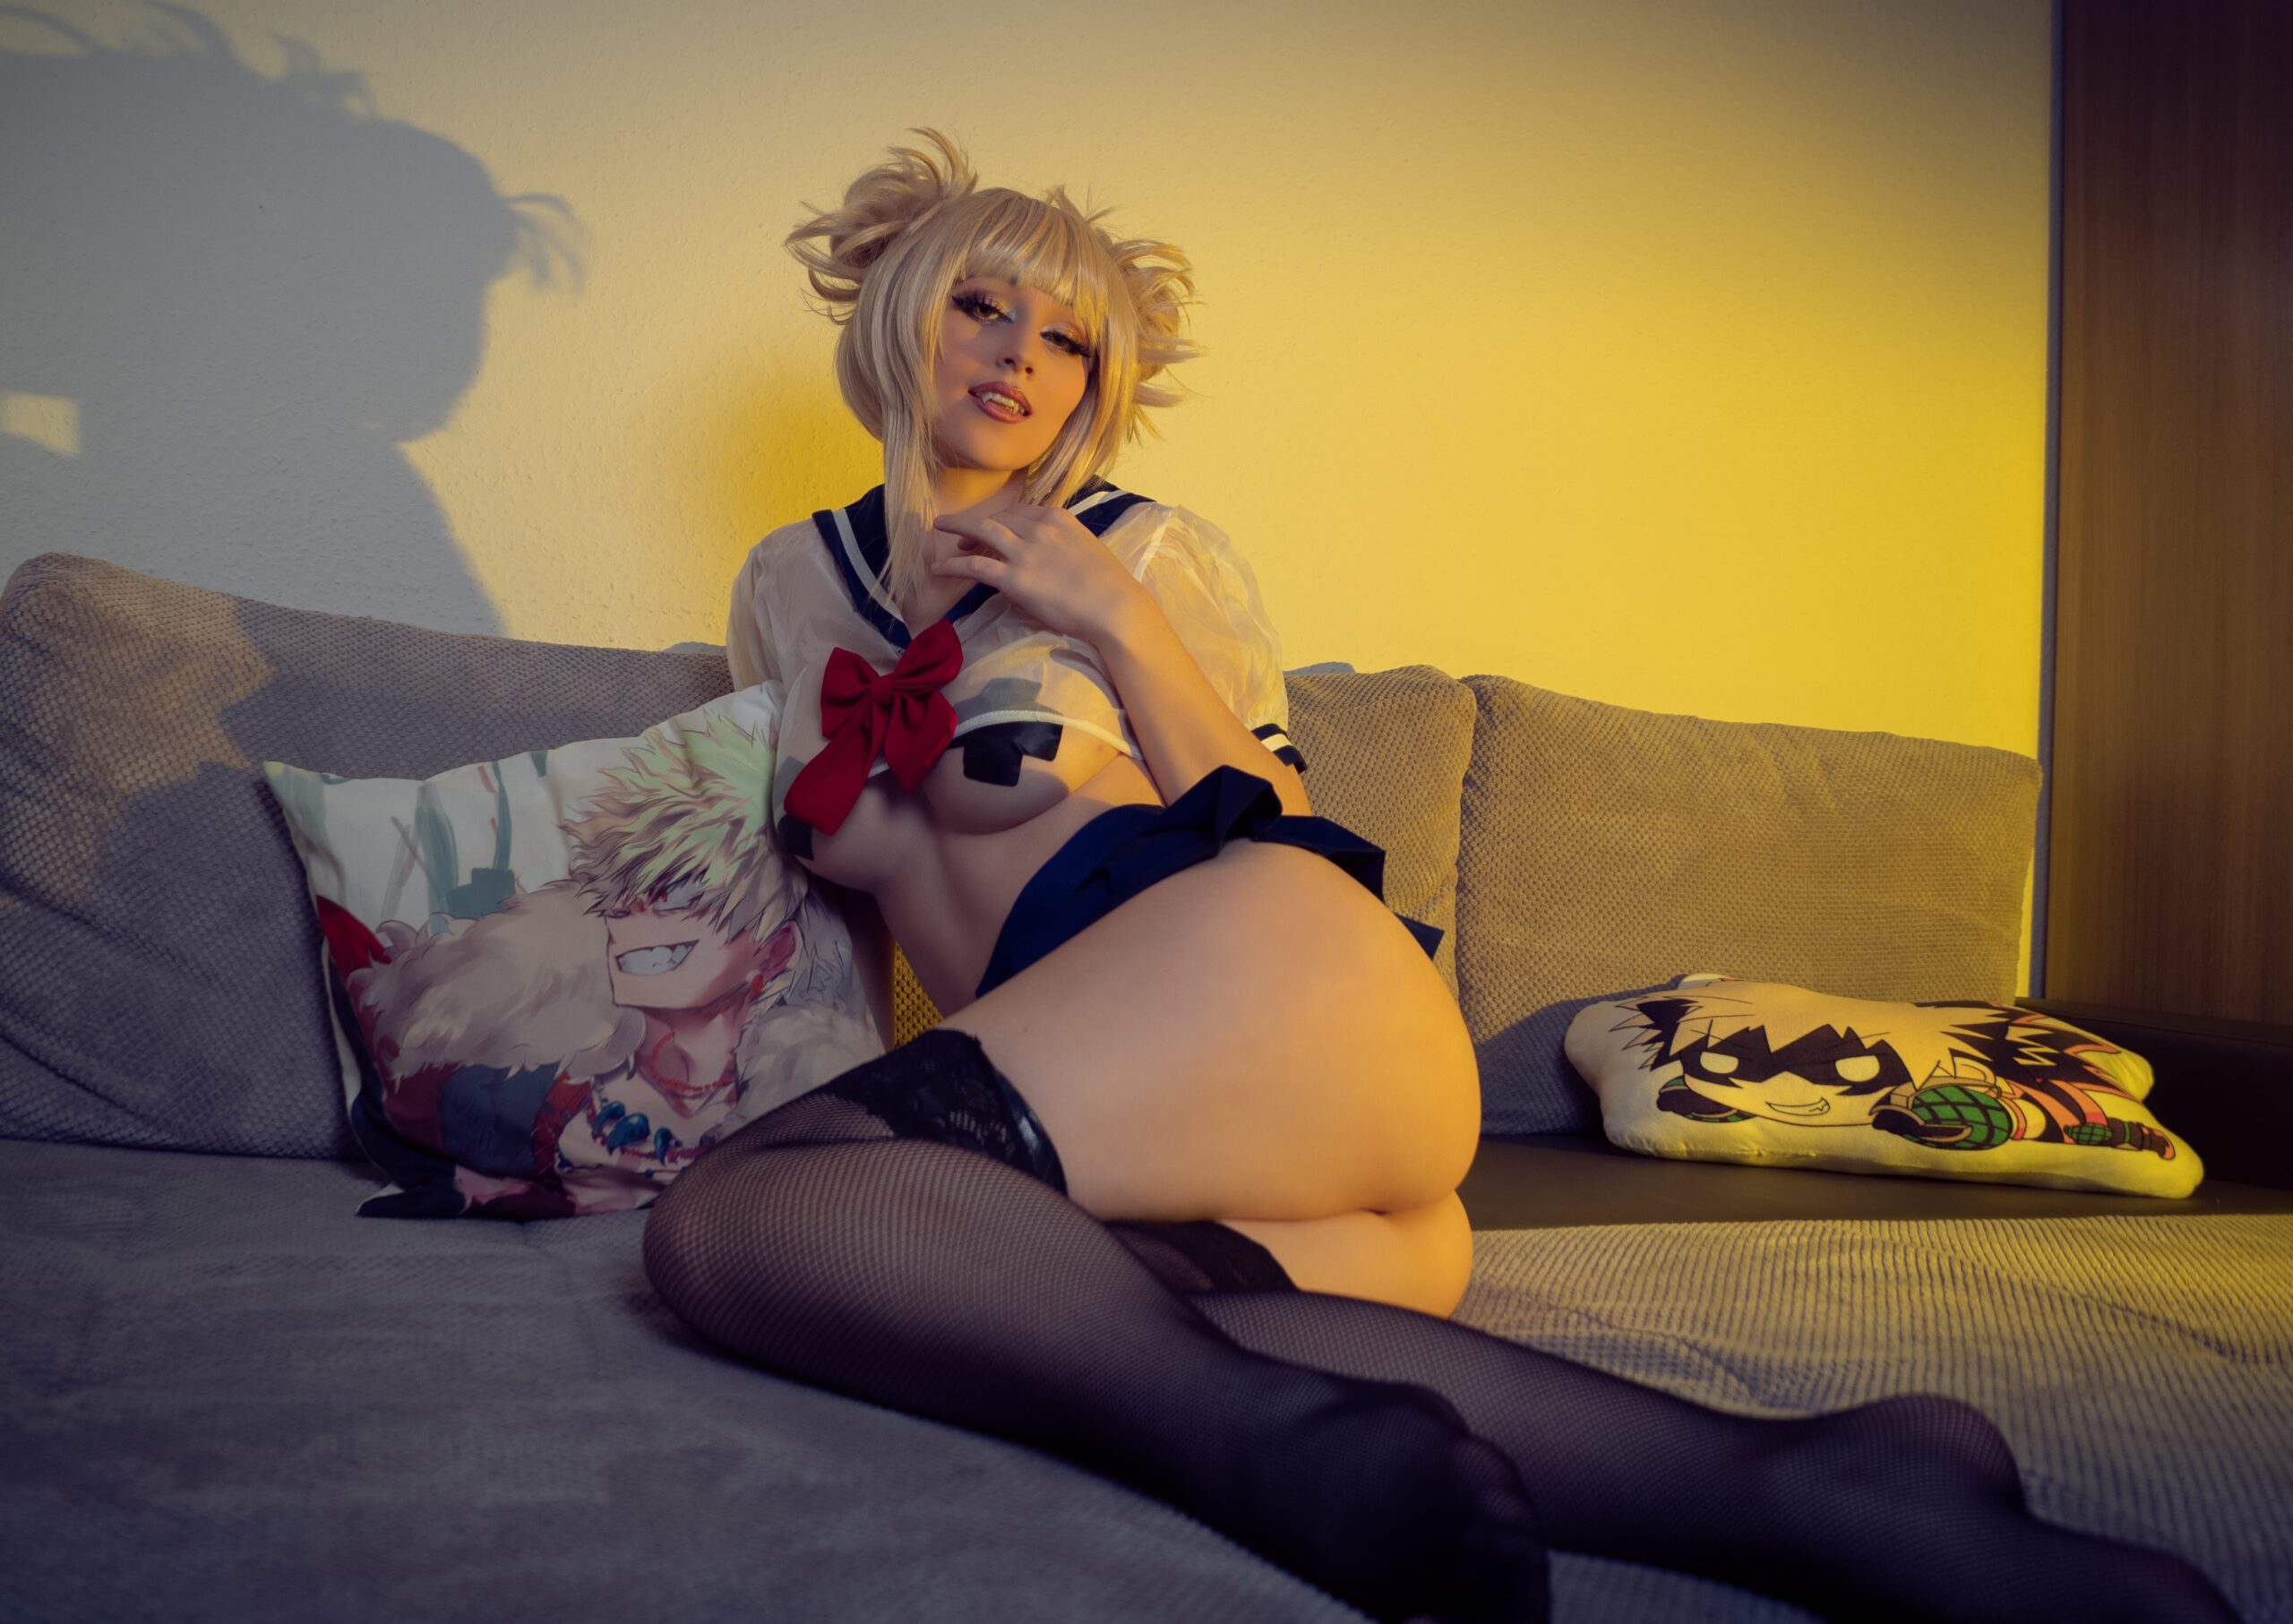 Toga Himiko By LienSue